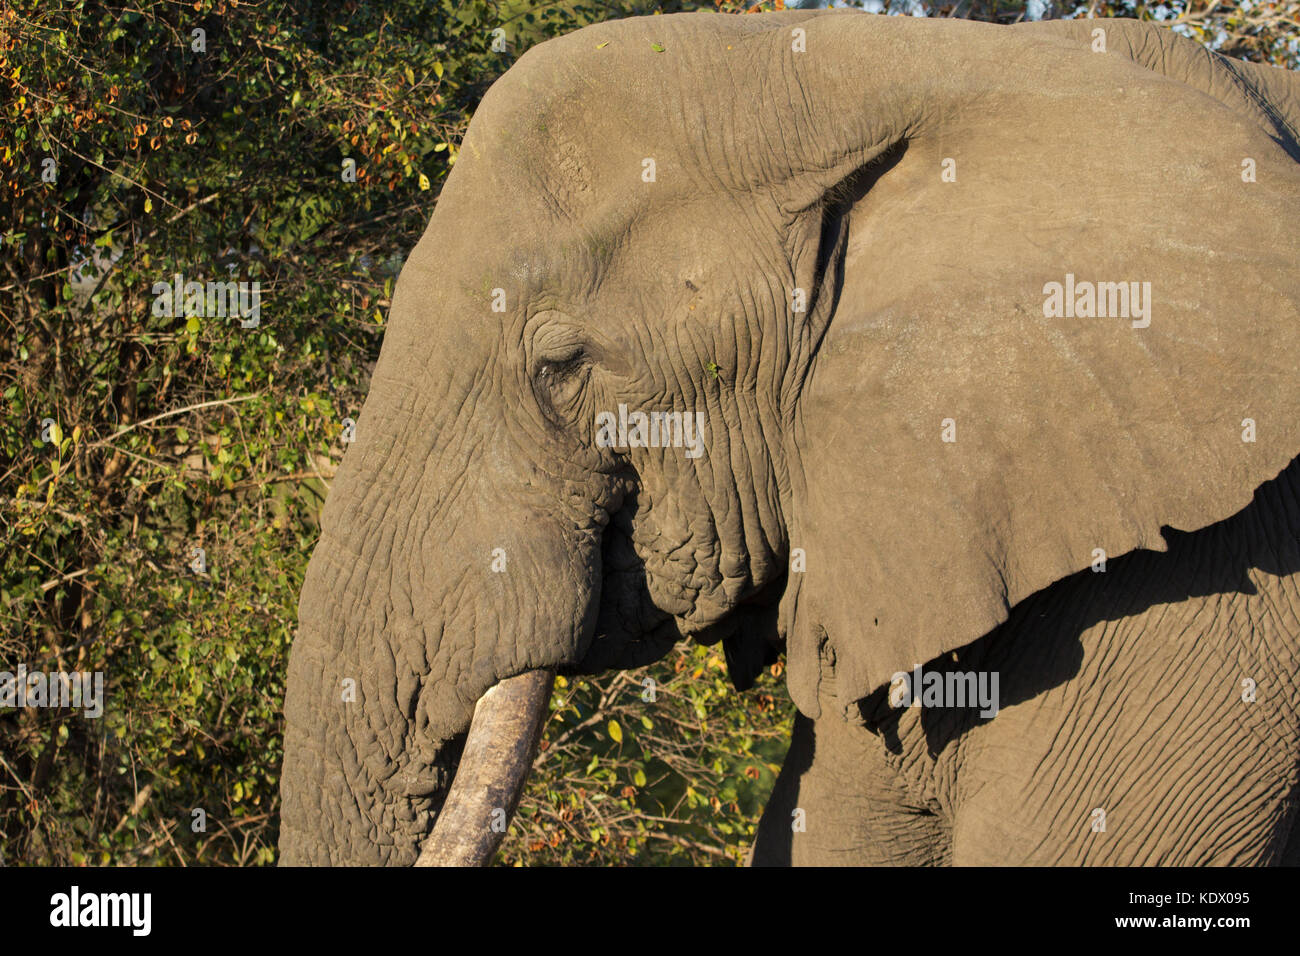 Bull elephant fino vicino, Kruger National Park, Sud Africa Foto Stock